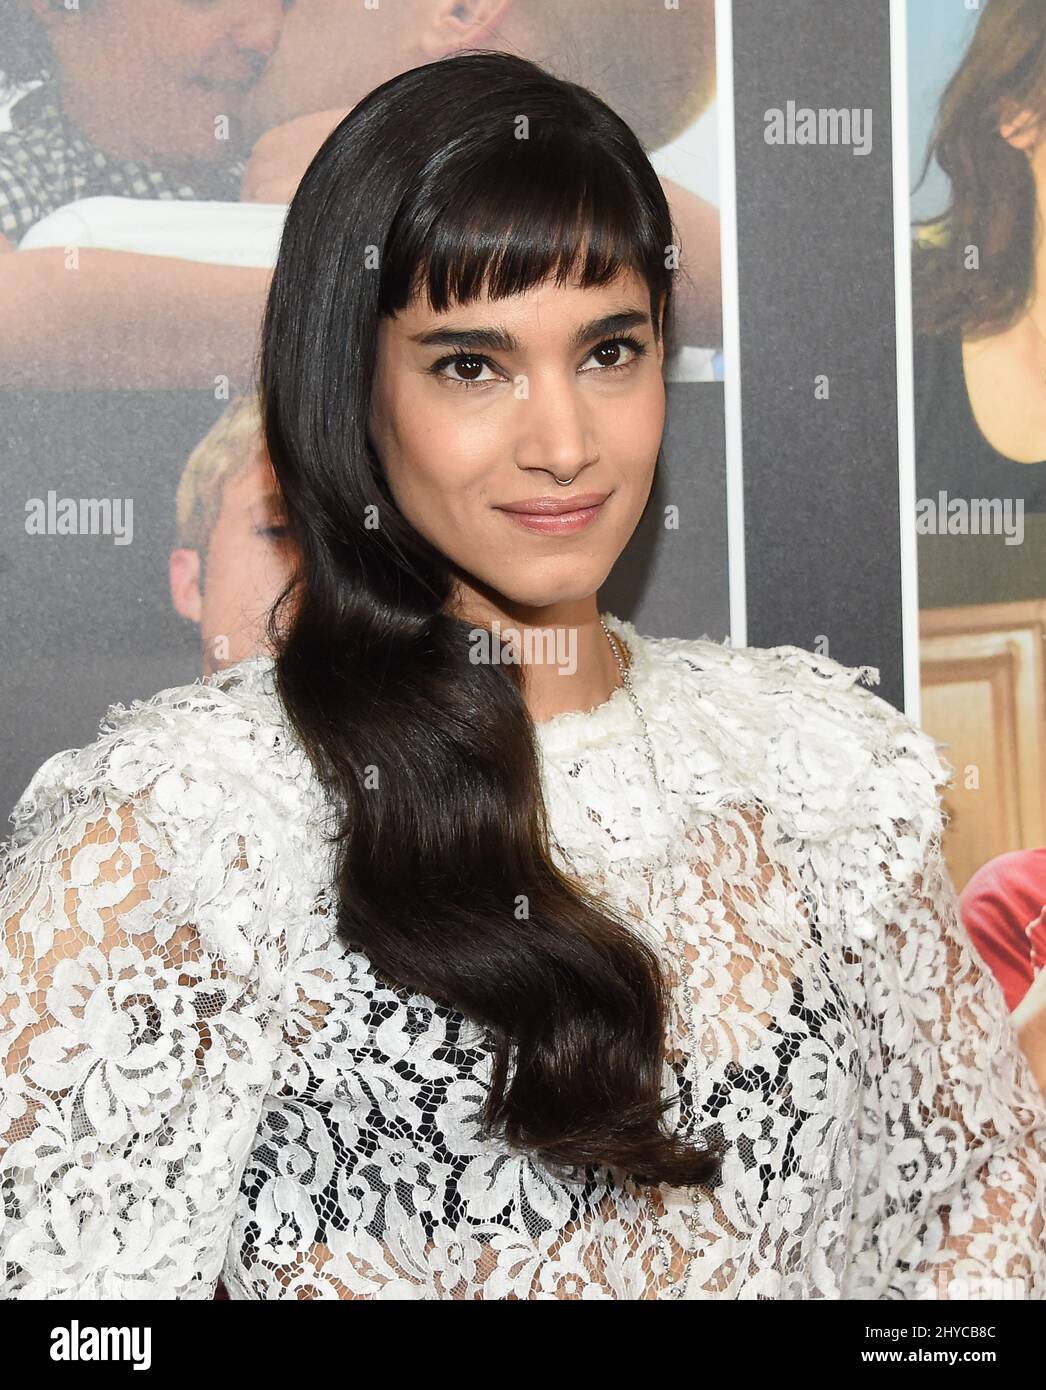 Sofia Boutella arriving to the Focus Features Celebrates 15 Years and A ...